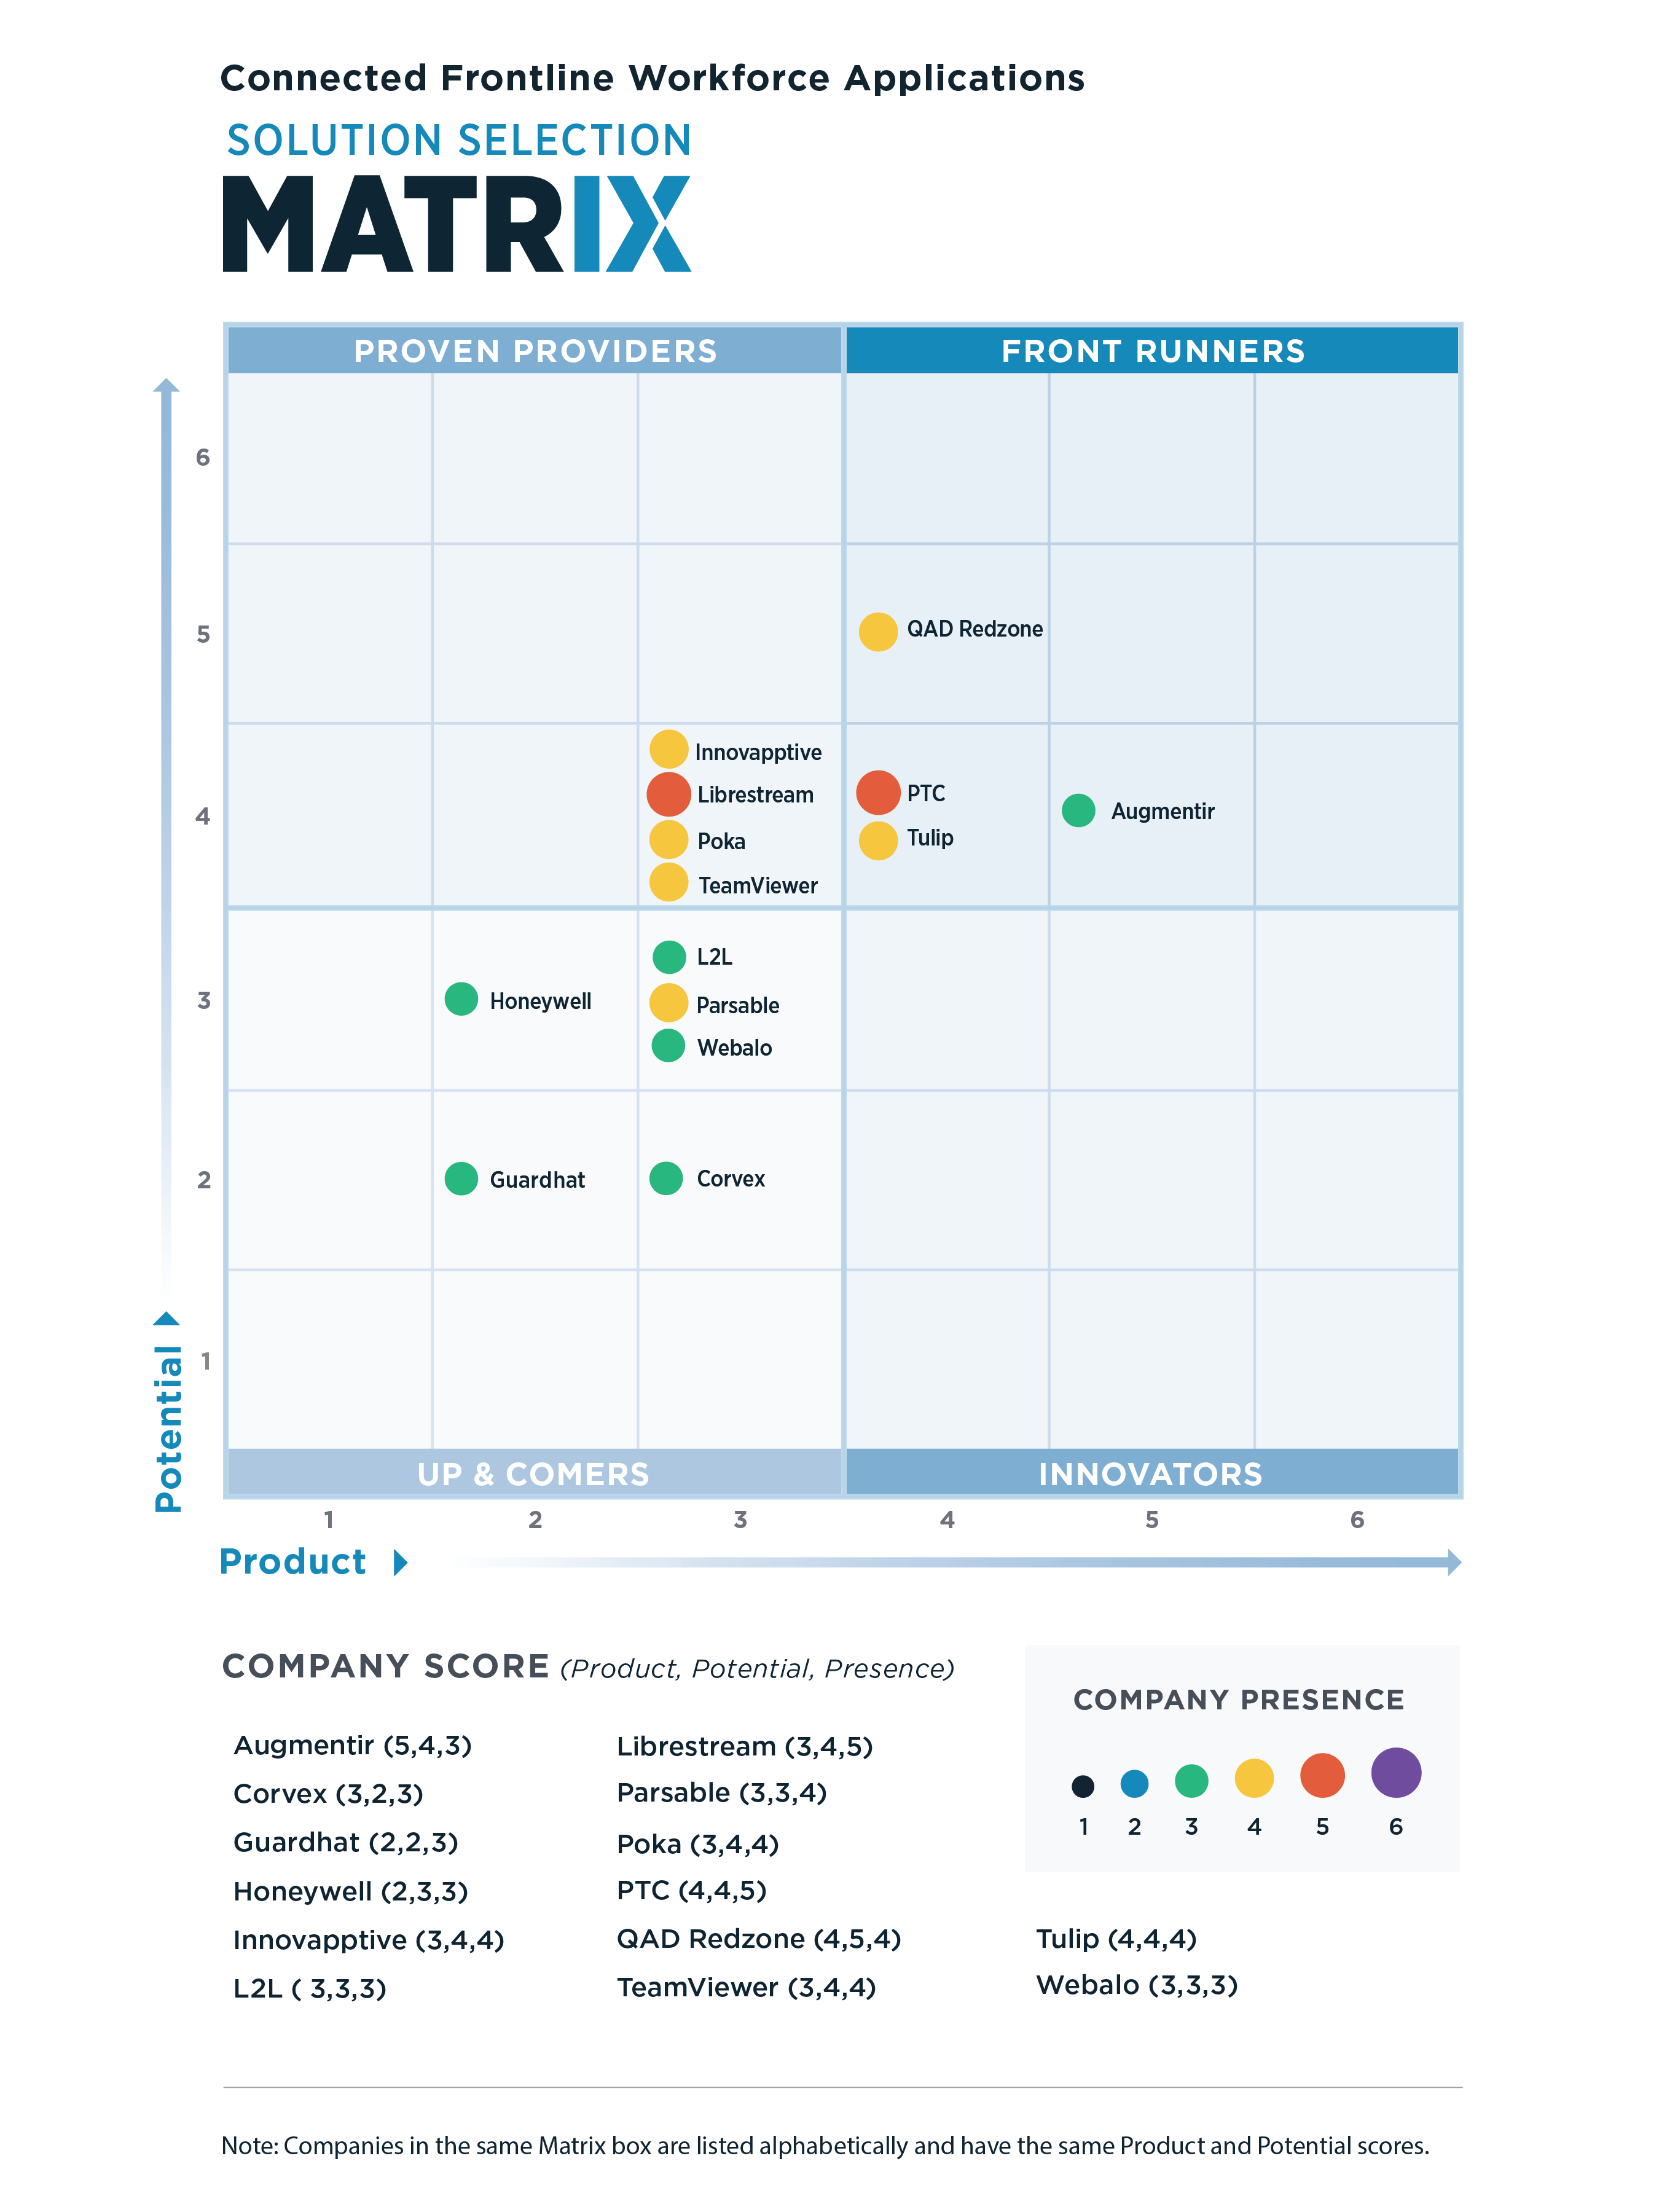 LNS Research Connected Frontline Workforce Applications Solution Selection Matrix